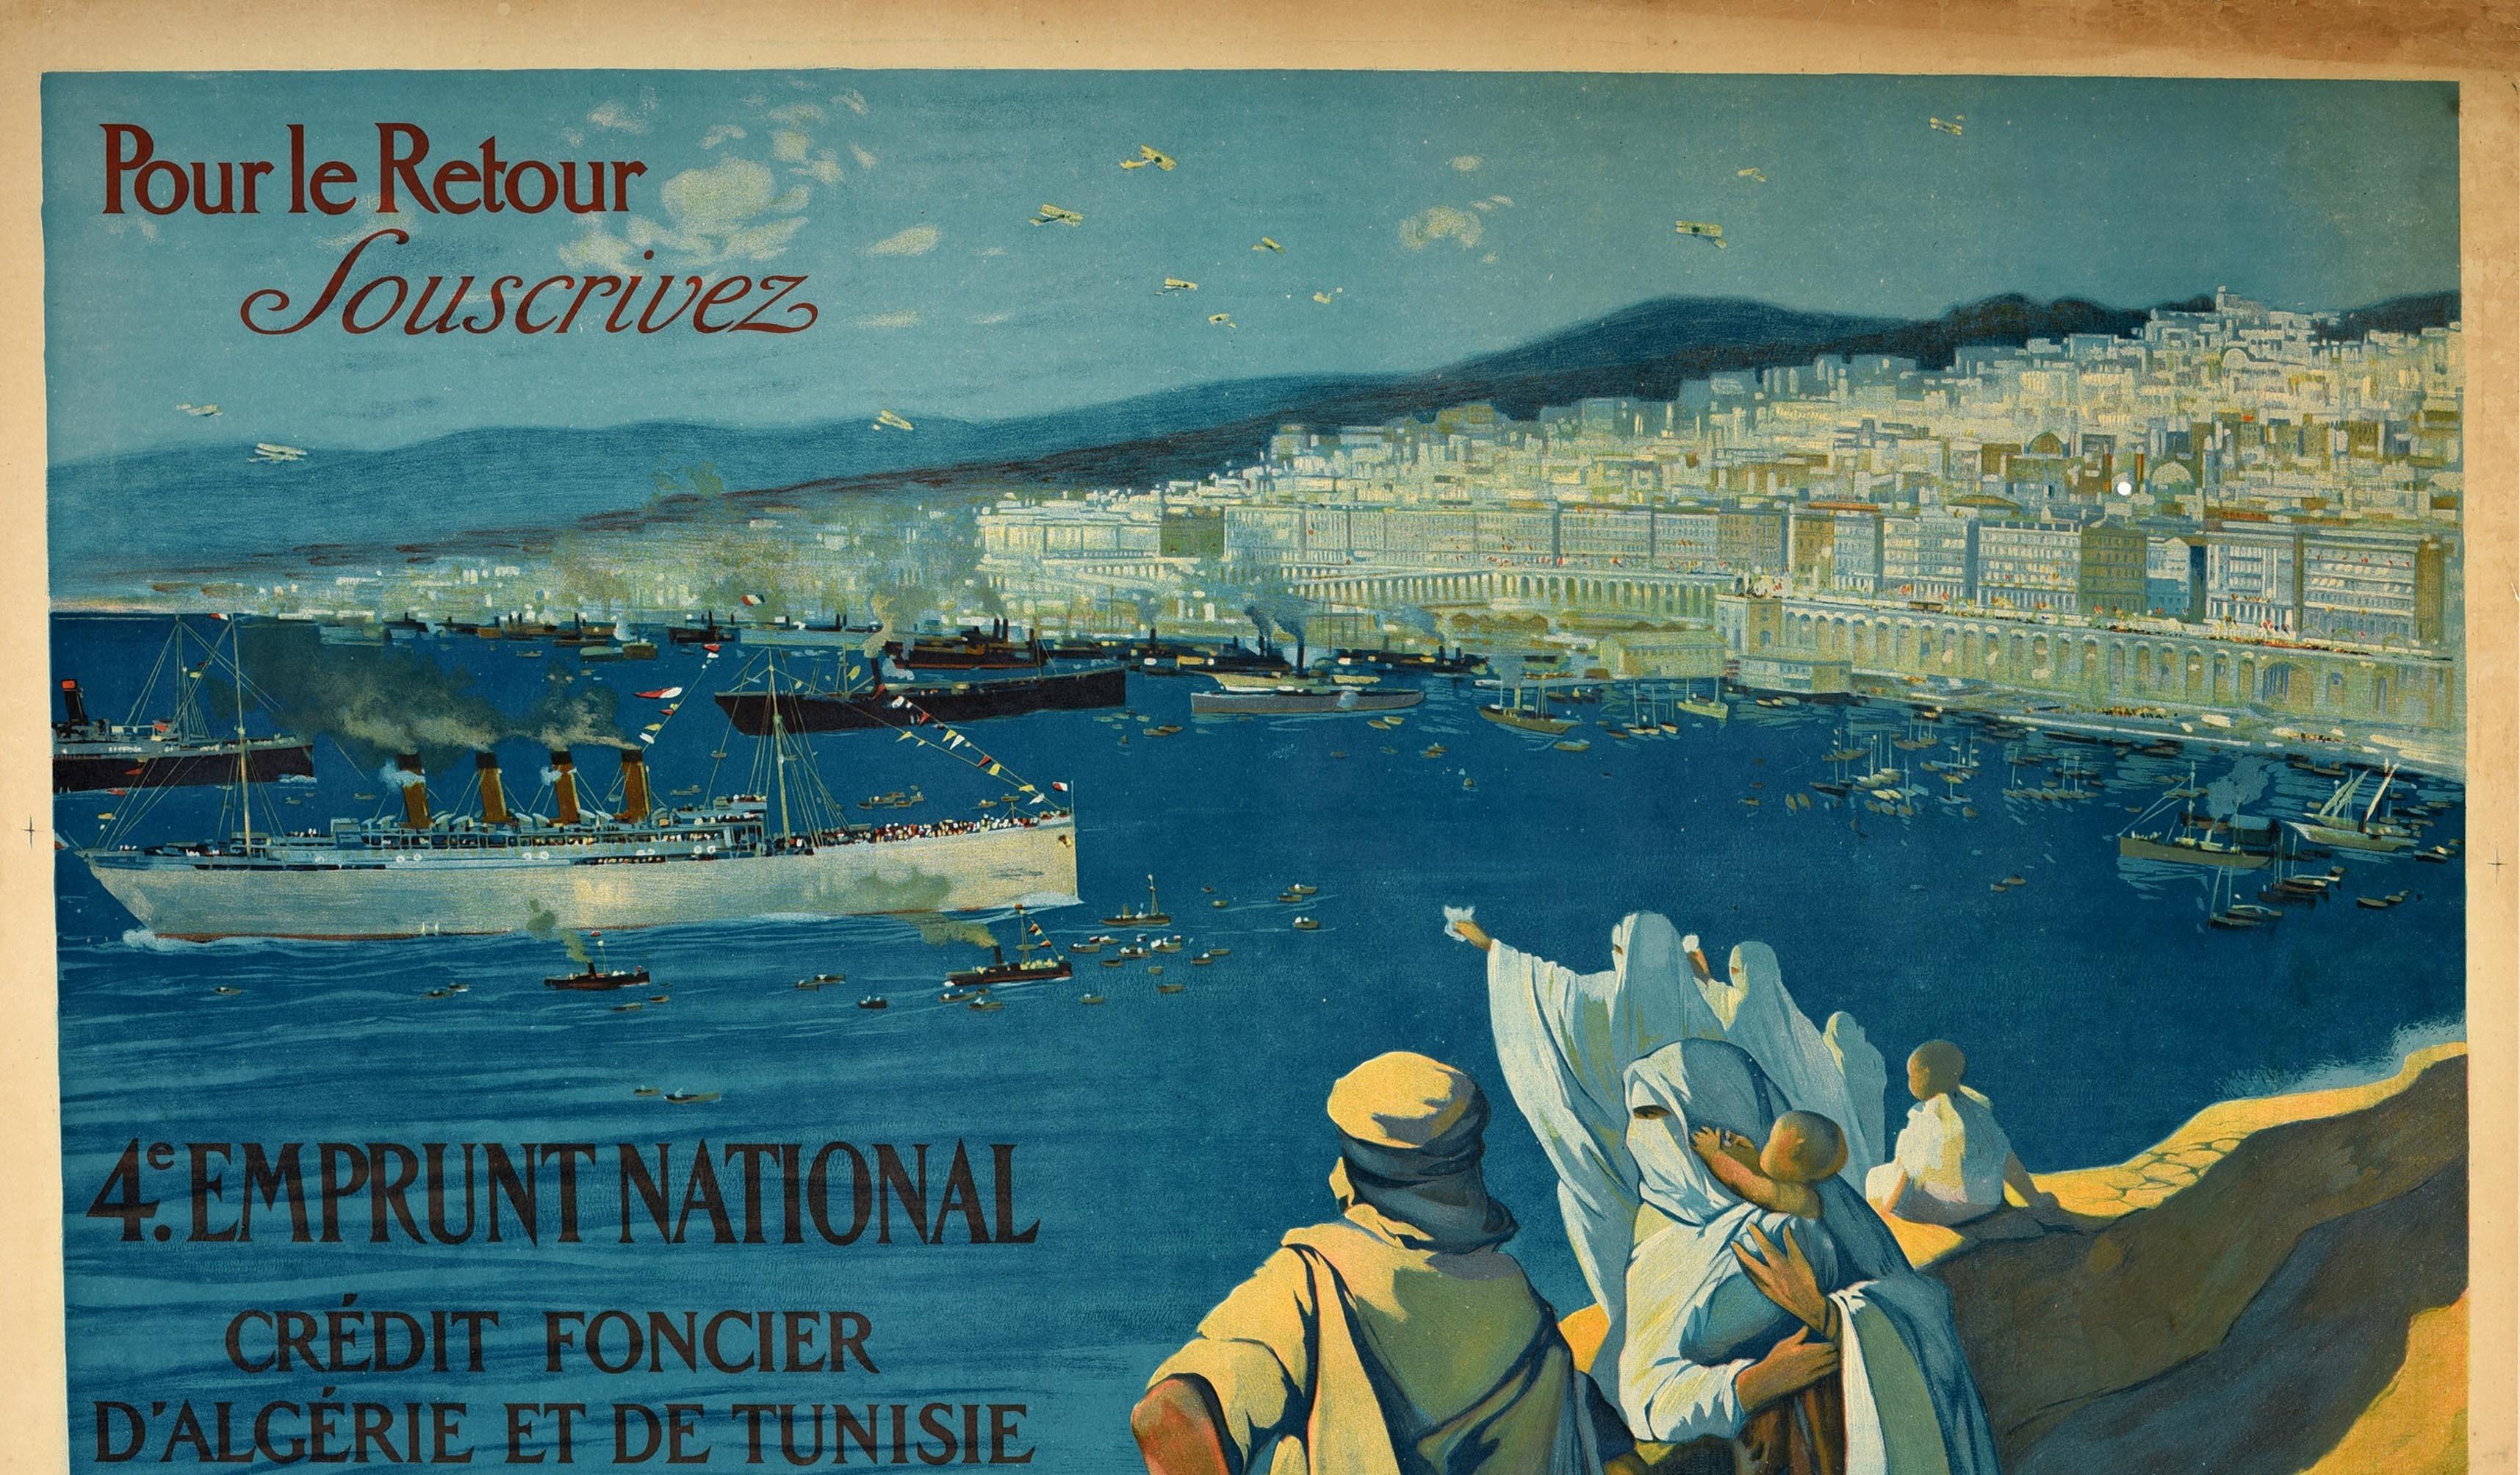 Original antique World War One poster - For the Return of Troops Subscribe to the 4th National loan land credit of Algeria and Tunisia / Pour le Retour Souscrivez 4e Emprunt National credit foncier d'Algerie et de Tunisie - featuring people looking